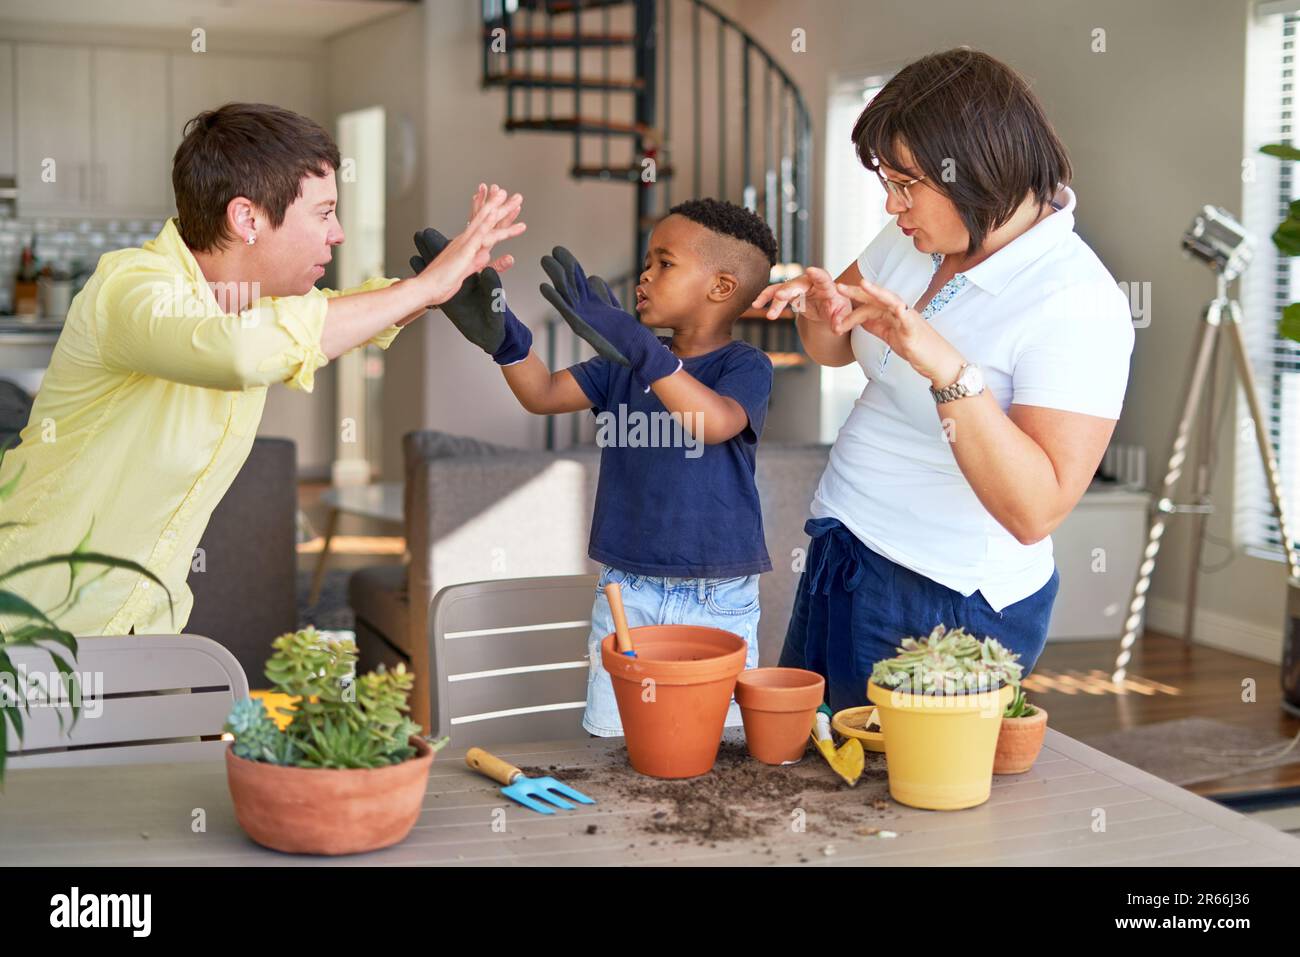 Playful lesbian couple and son gesturing, planting plants on patio Stock Photo